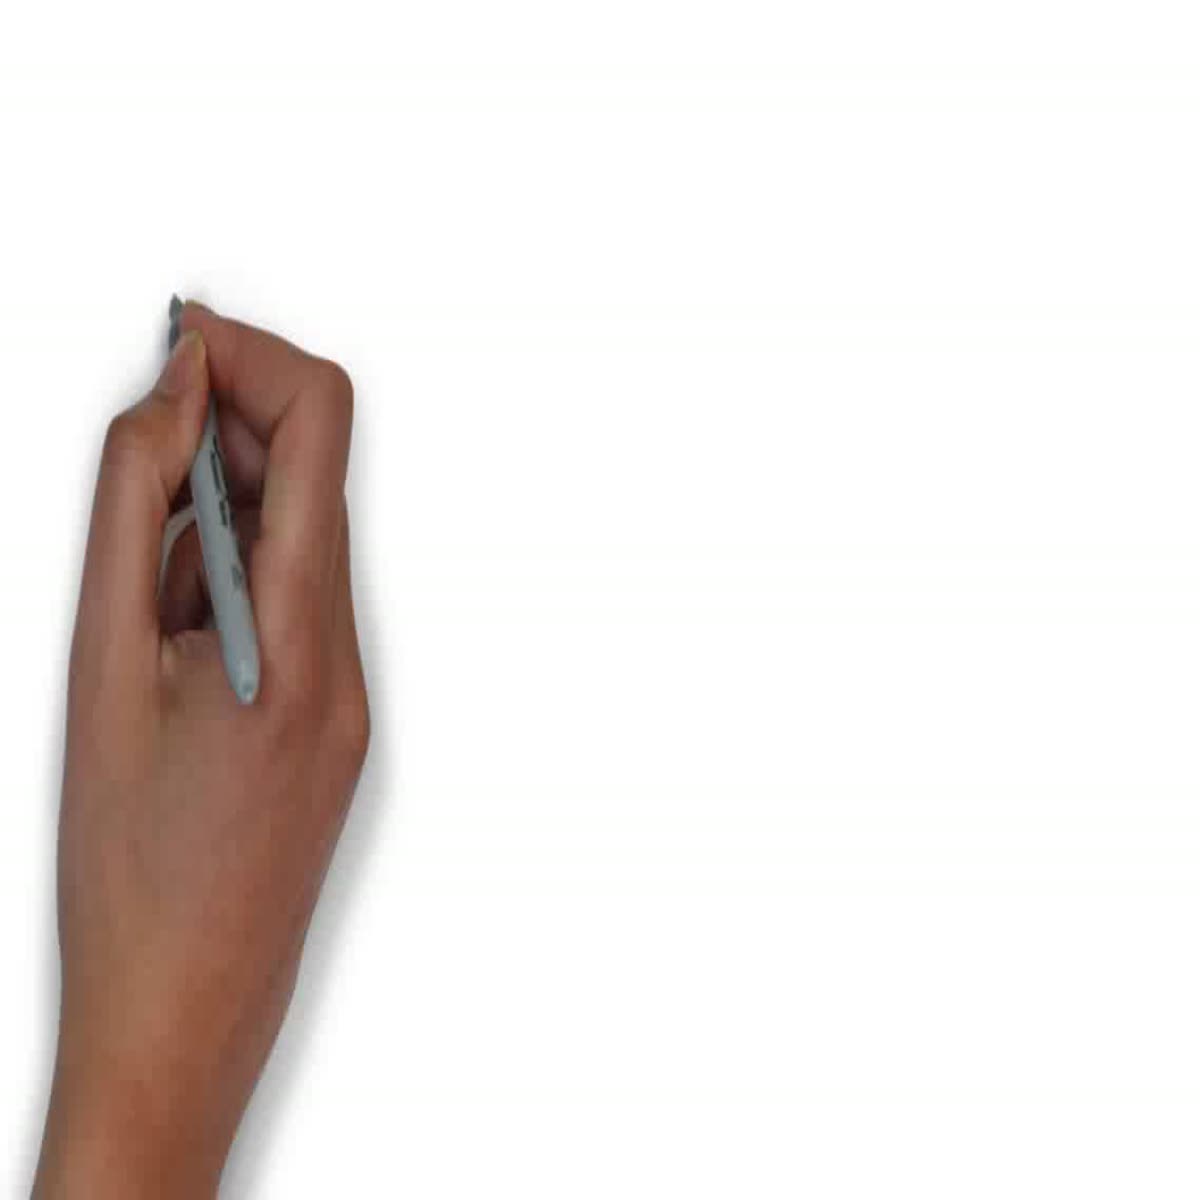 I will create custom whiteboard animation videos, explainer videos and doodle videos.